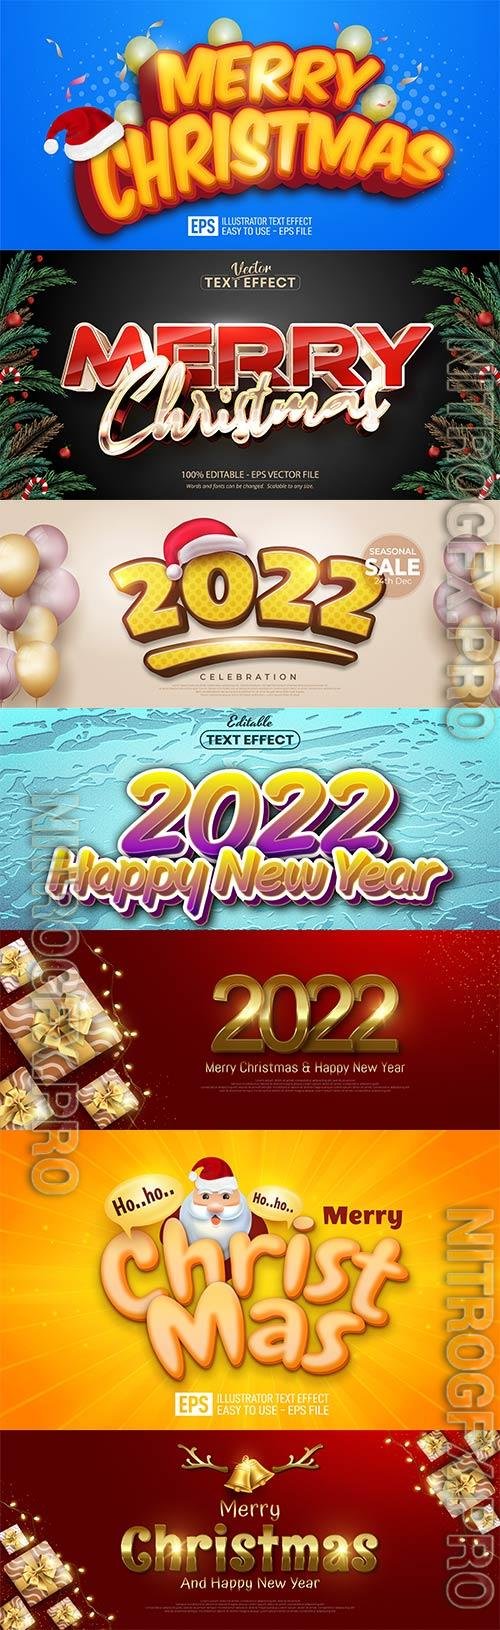 Merry christmas and happy new year 2022 editable vector text effects vol 8